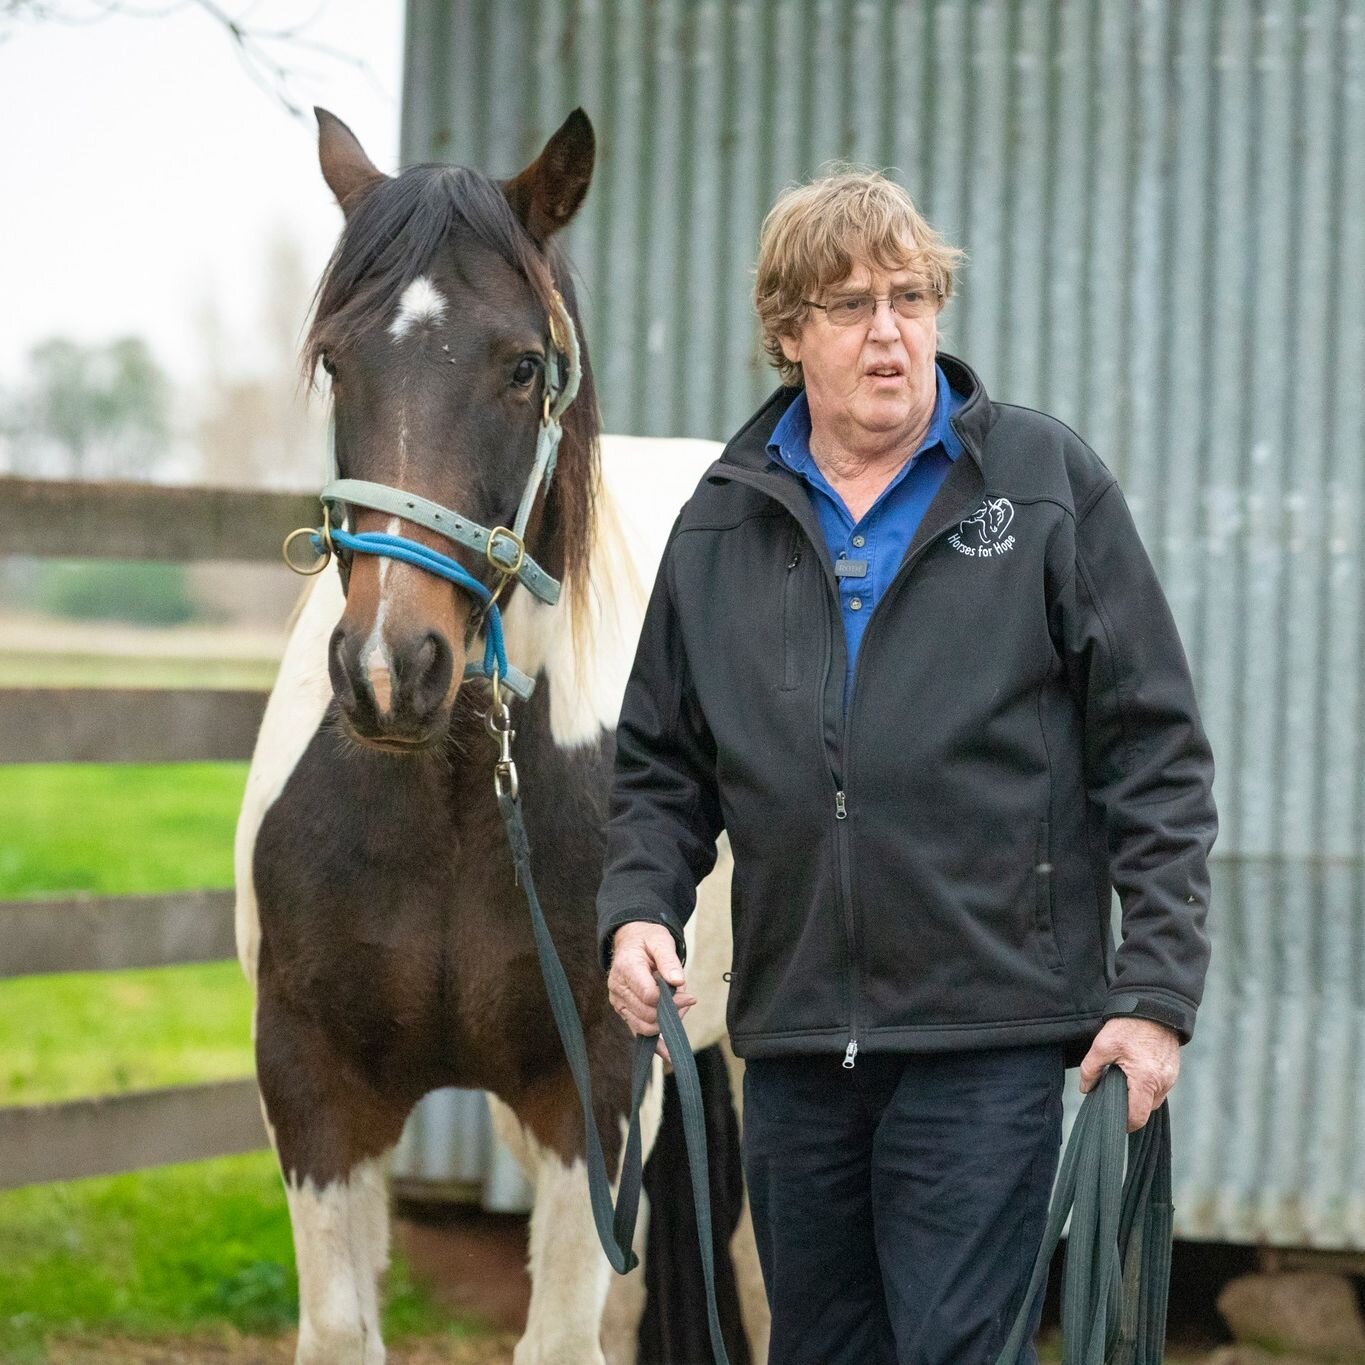 Colin and Phoenix &quot;Neither take their work lightly&quot; 

This moment was captured during a filming session last year, just moments before it started raining.

#horsesforhope #equineassistednarrativetherapy #equinetherapy  #goulburnvalley